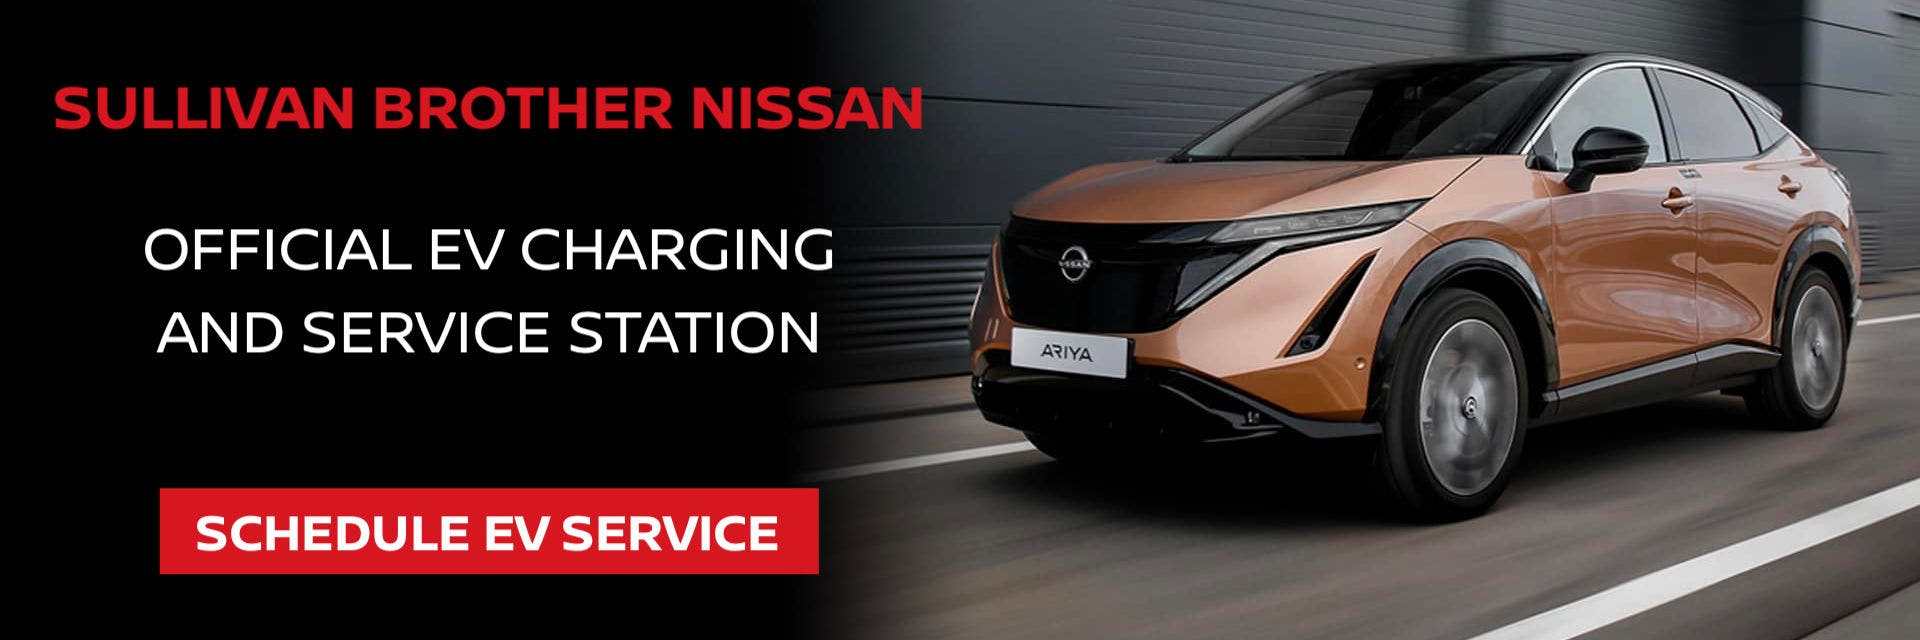 Nissan EV CHARGING AND SERVICE